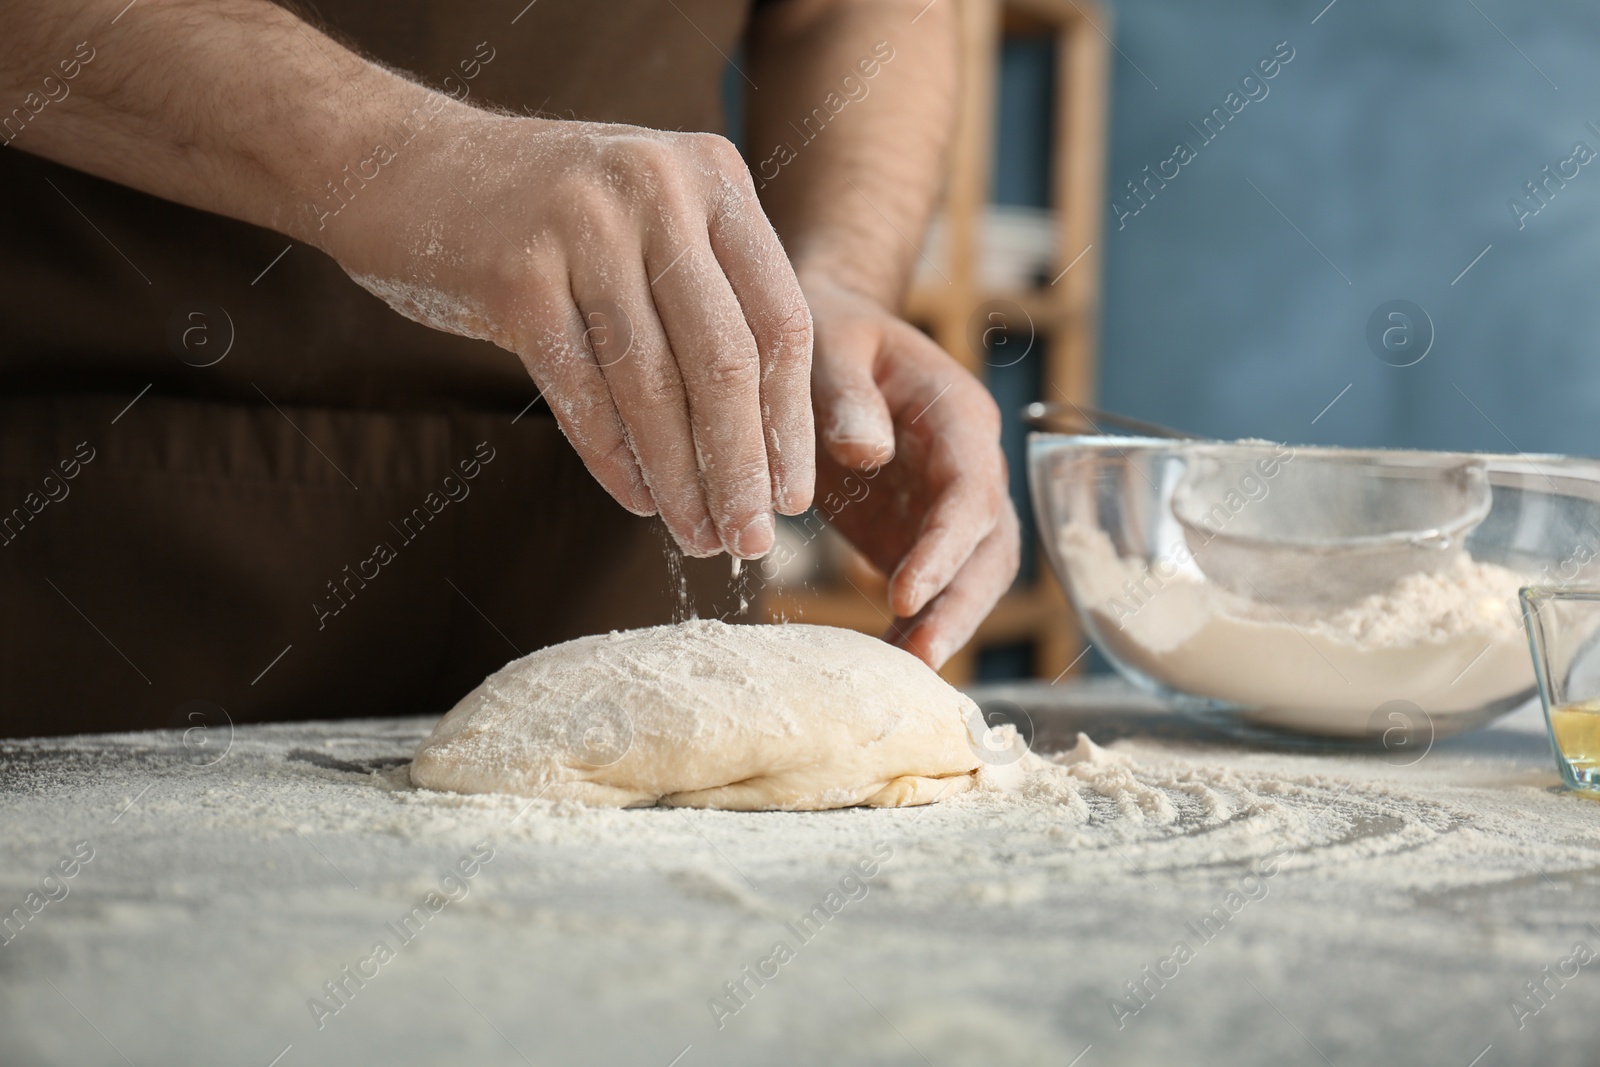 Photo of Man sprinkling flour over dough on table in kitchen